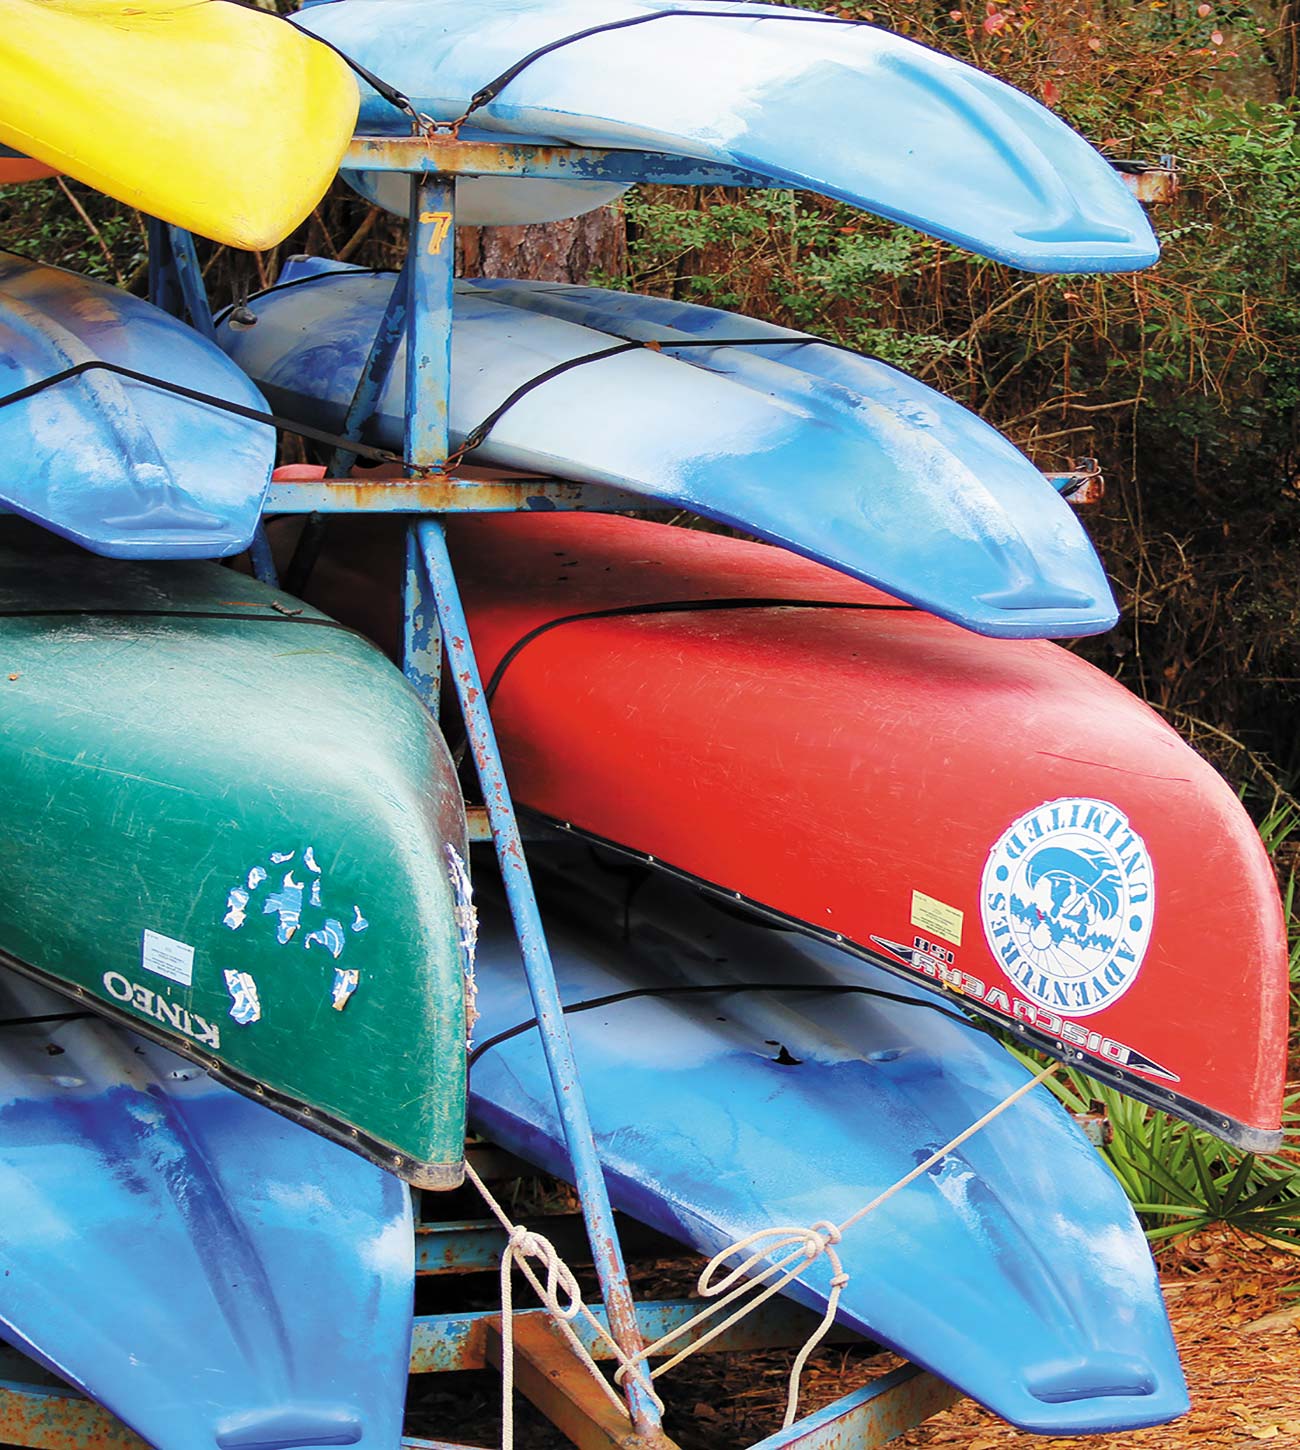 canoes ready for launch at Adventures Unlimited Outdoor Center near Pensacola - photo 6